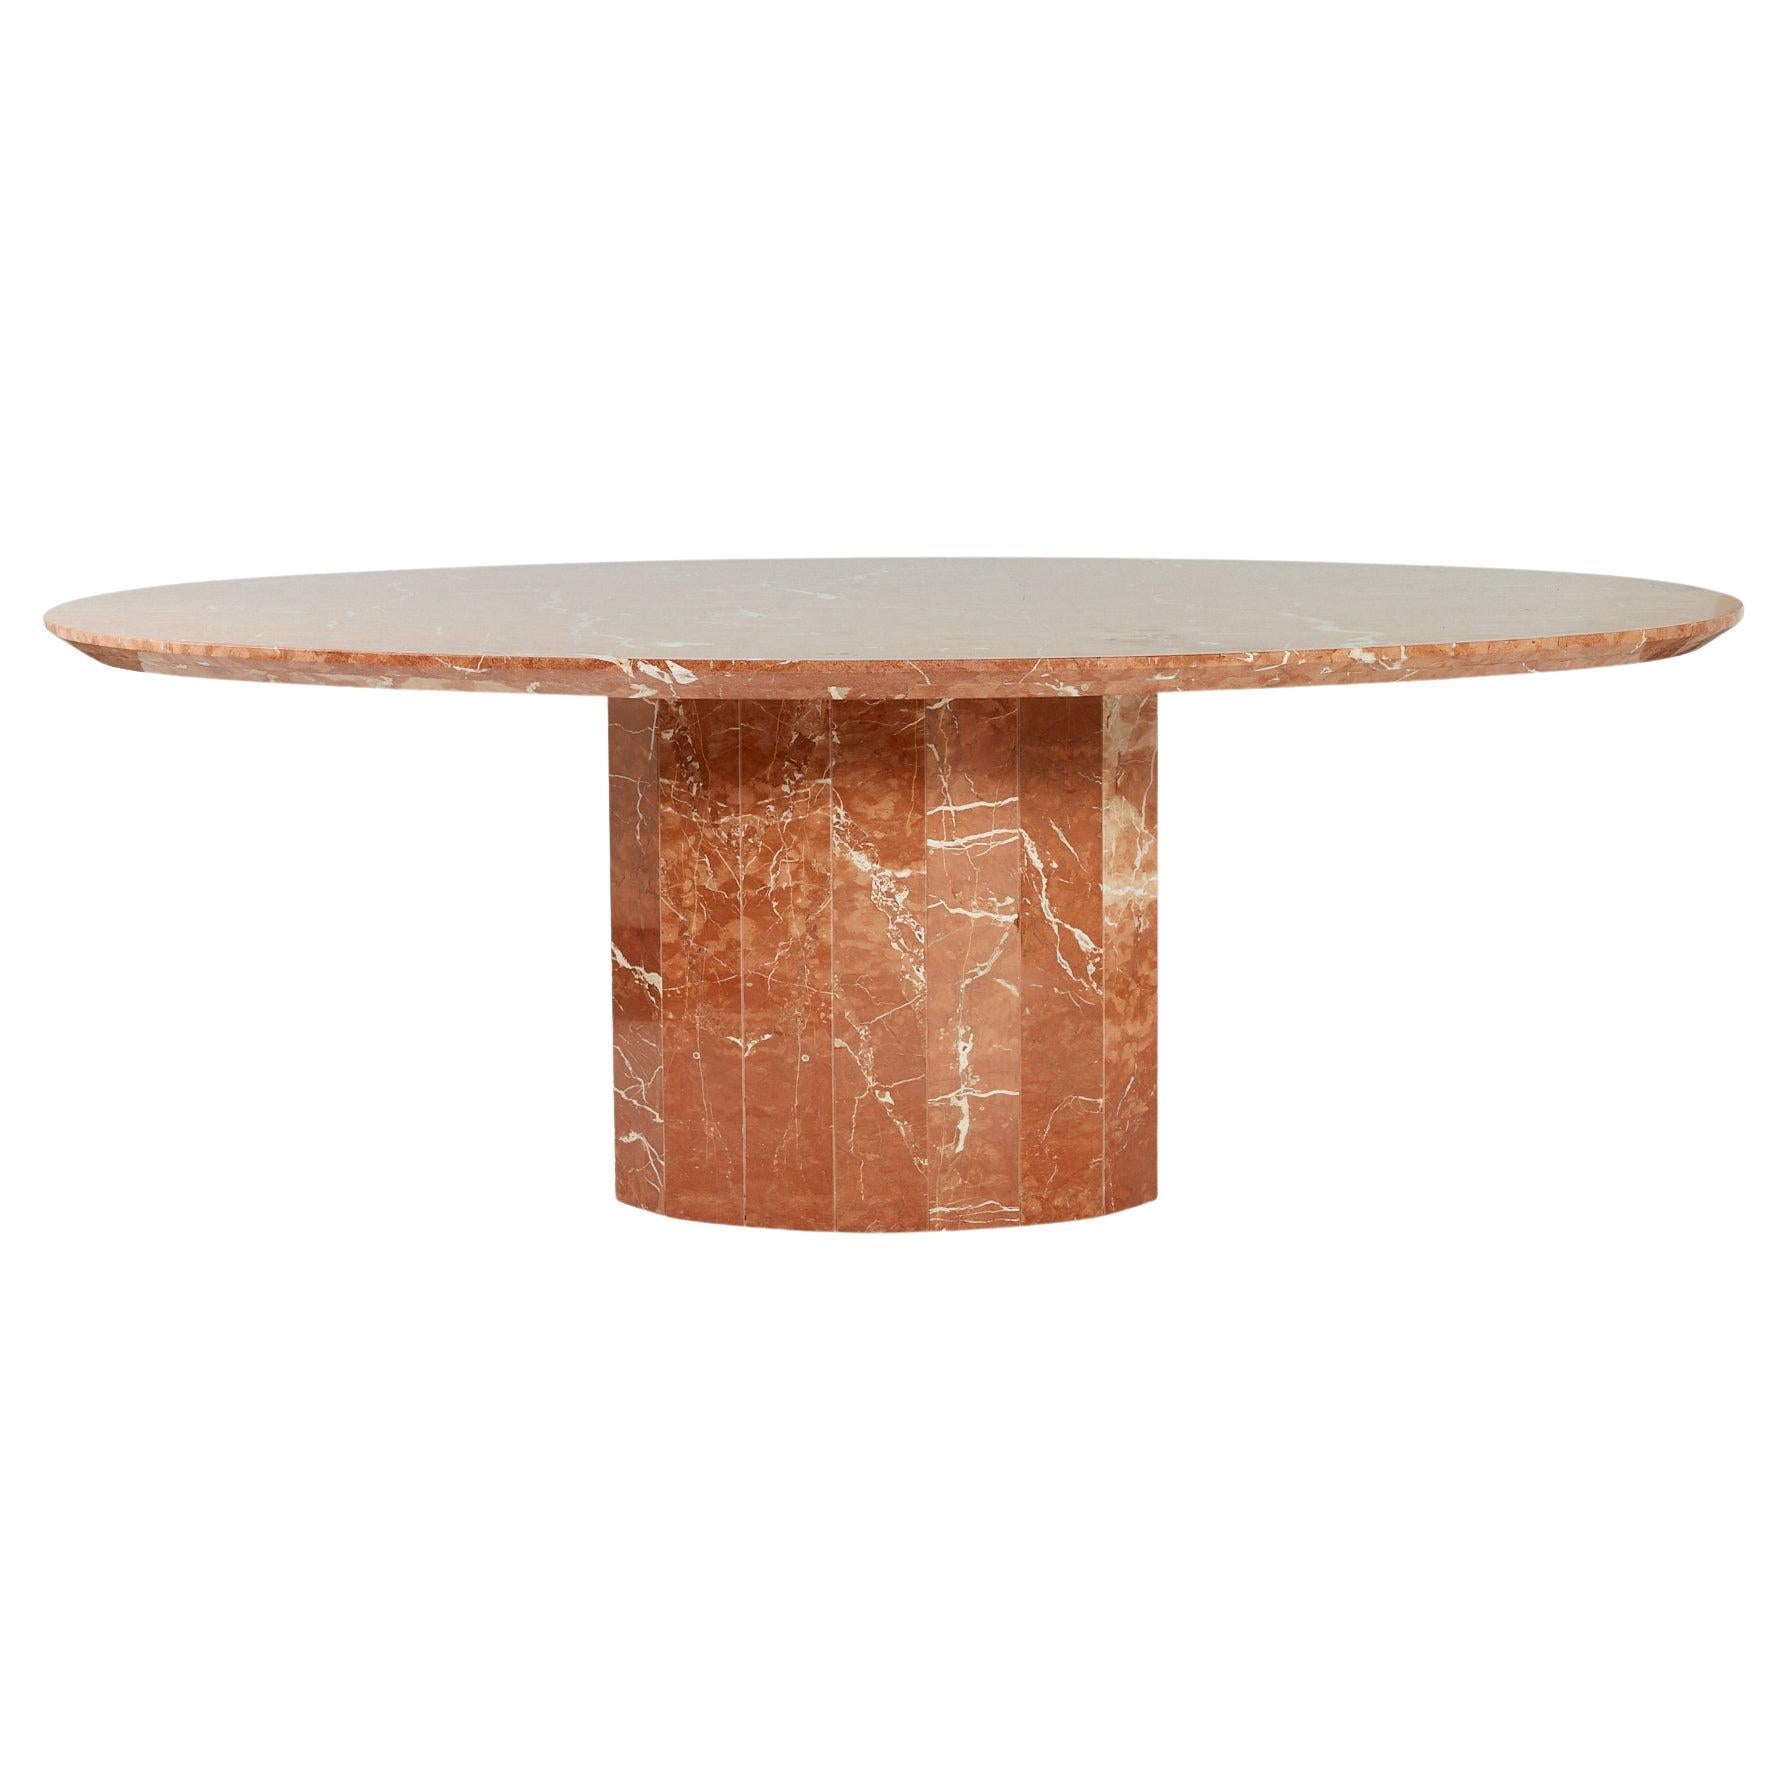 Marble Dining Table in Red Marble with Faceted Base, 6-8 Seater